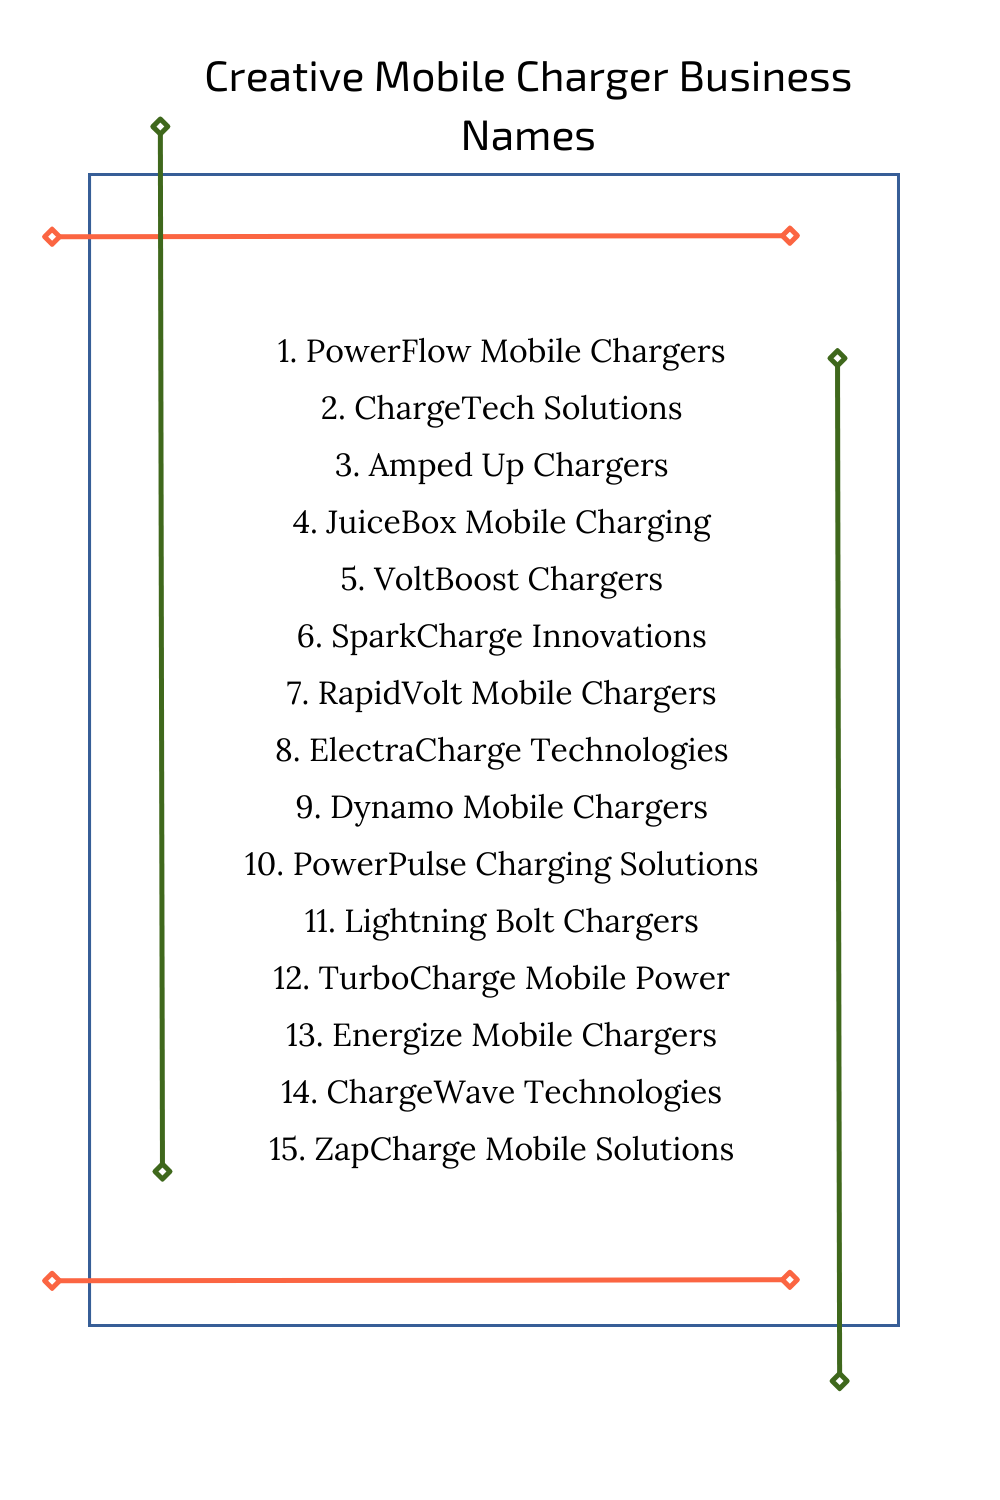 Creative Mobile Charger Business Names